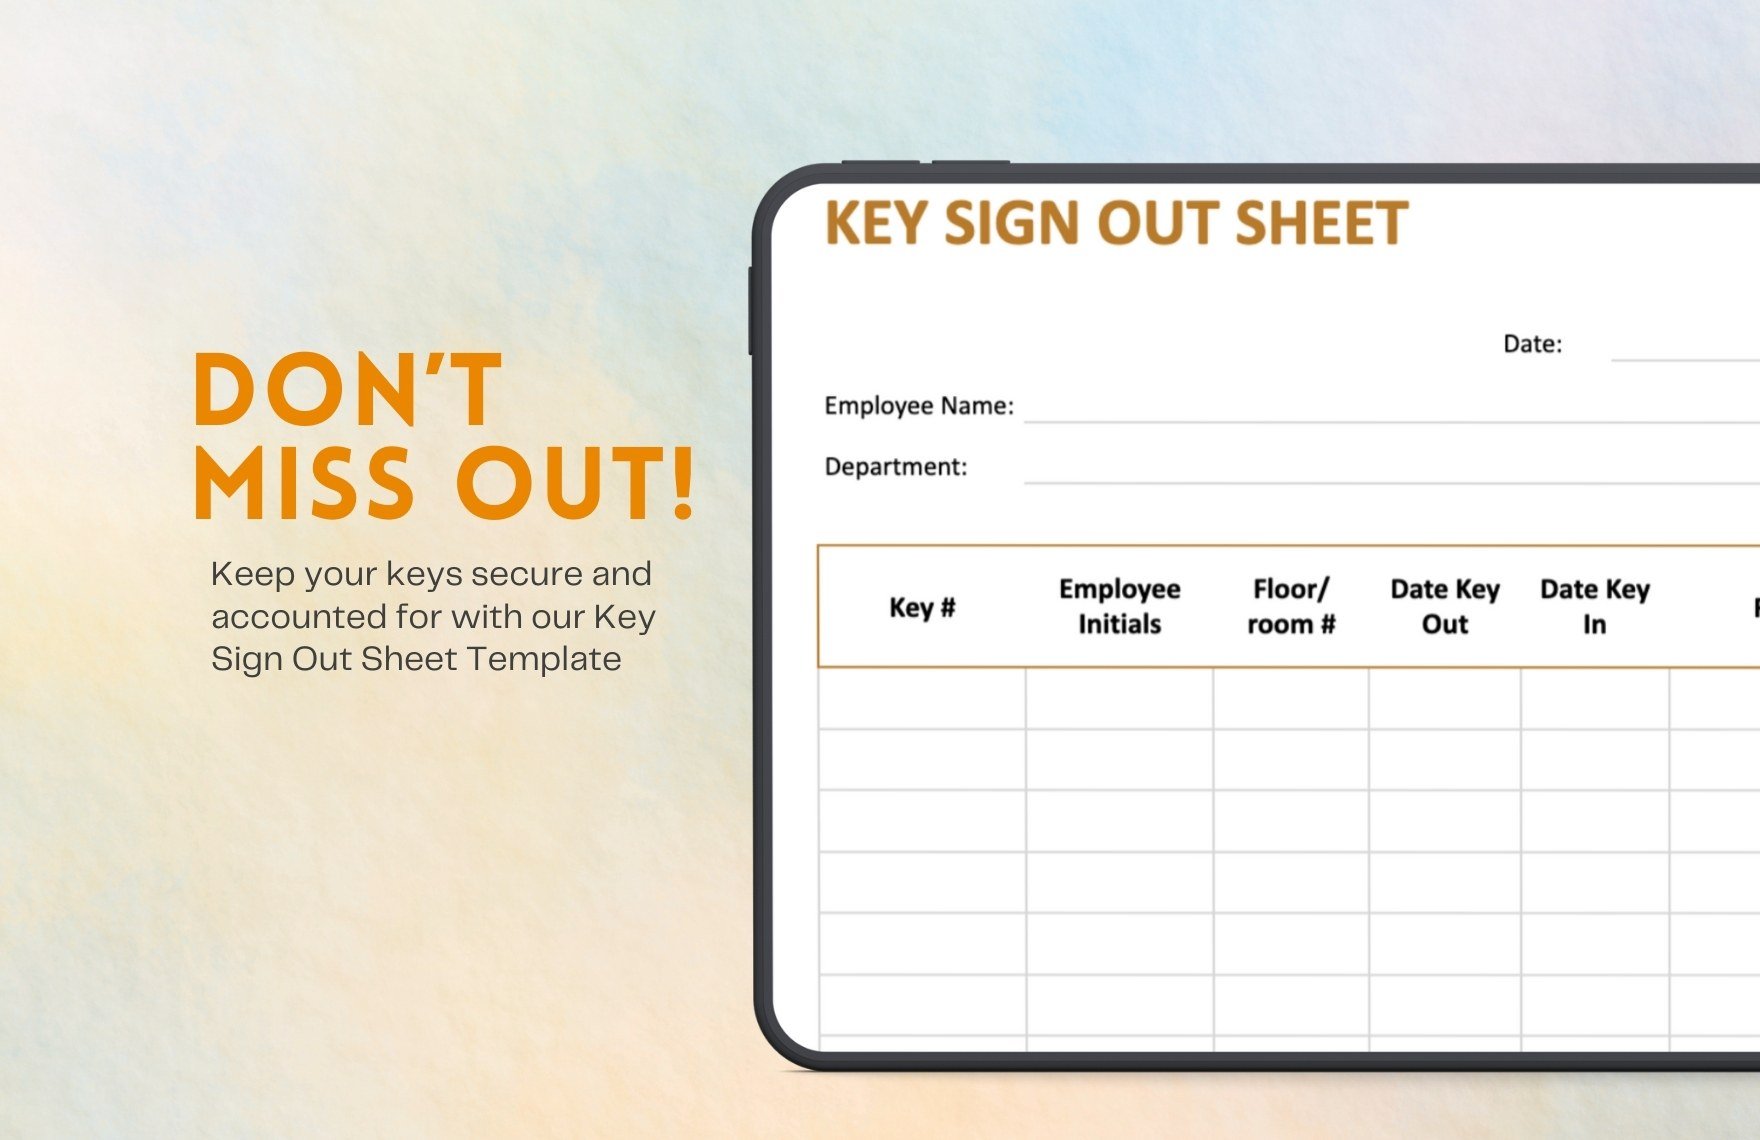 Key Sign Out Sheet Template